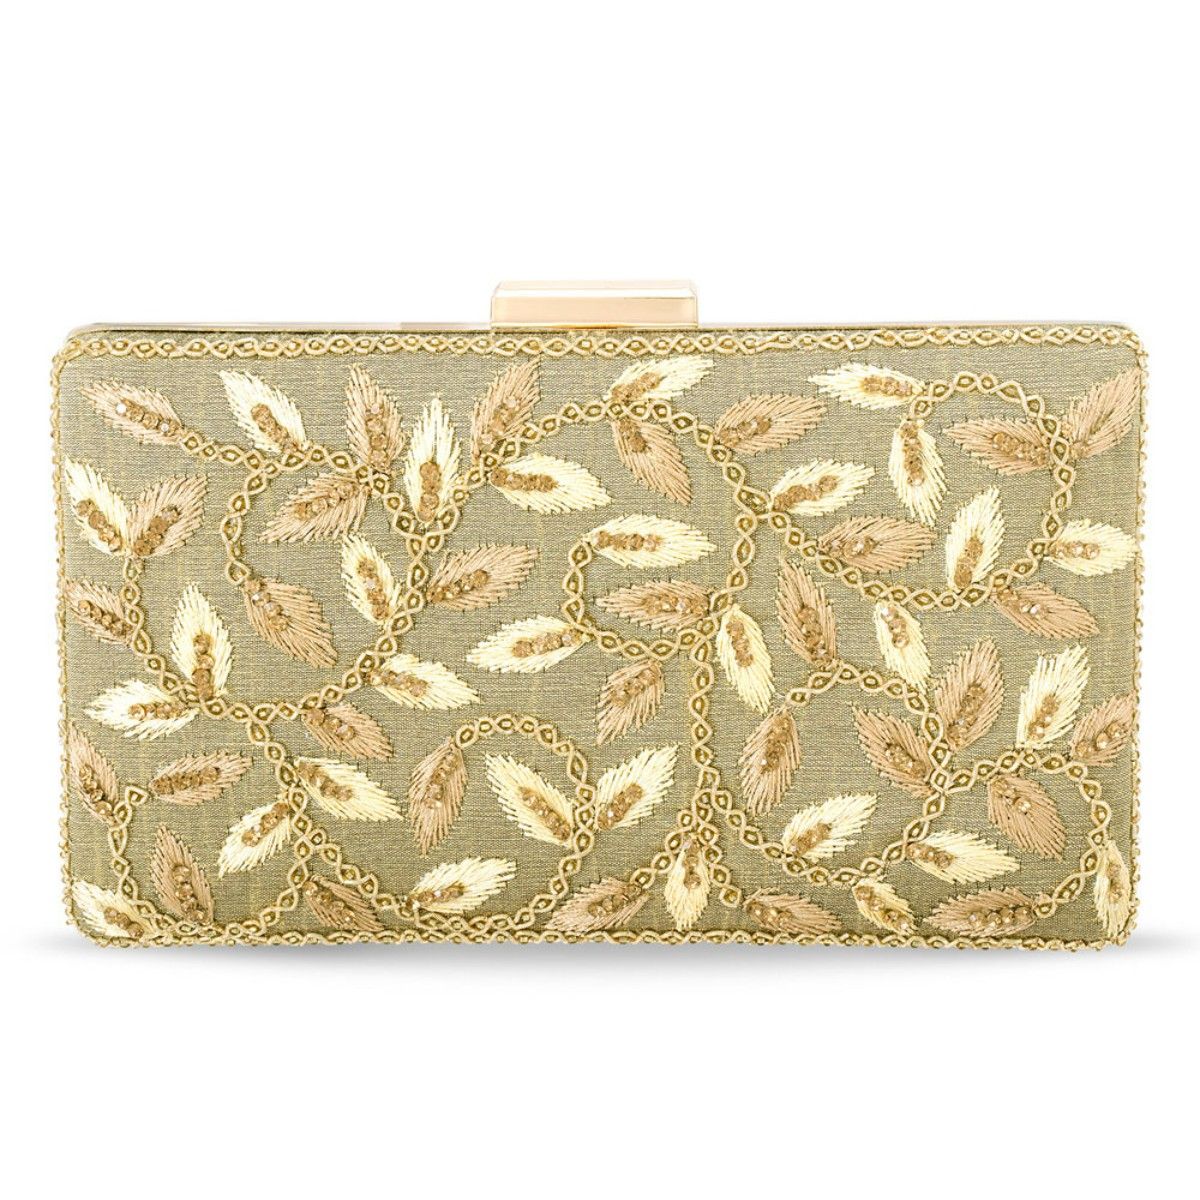 Buy Gold Clutch Bag Online In India  Etsy India